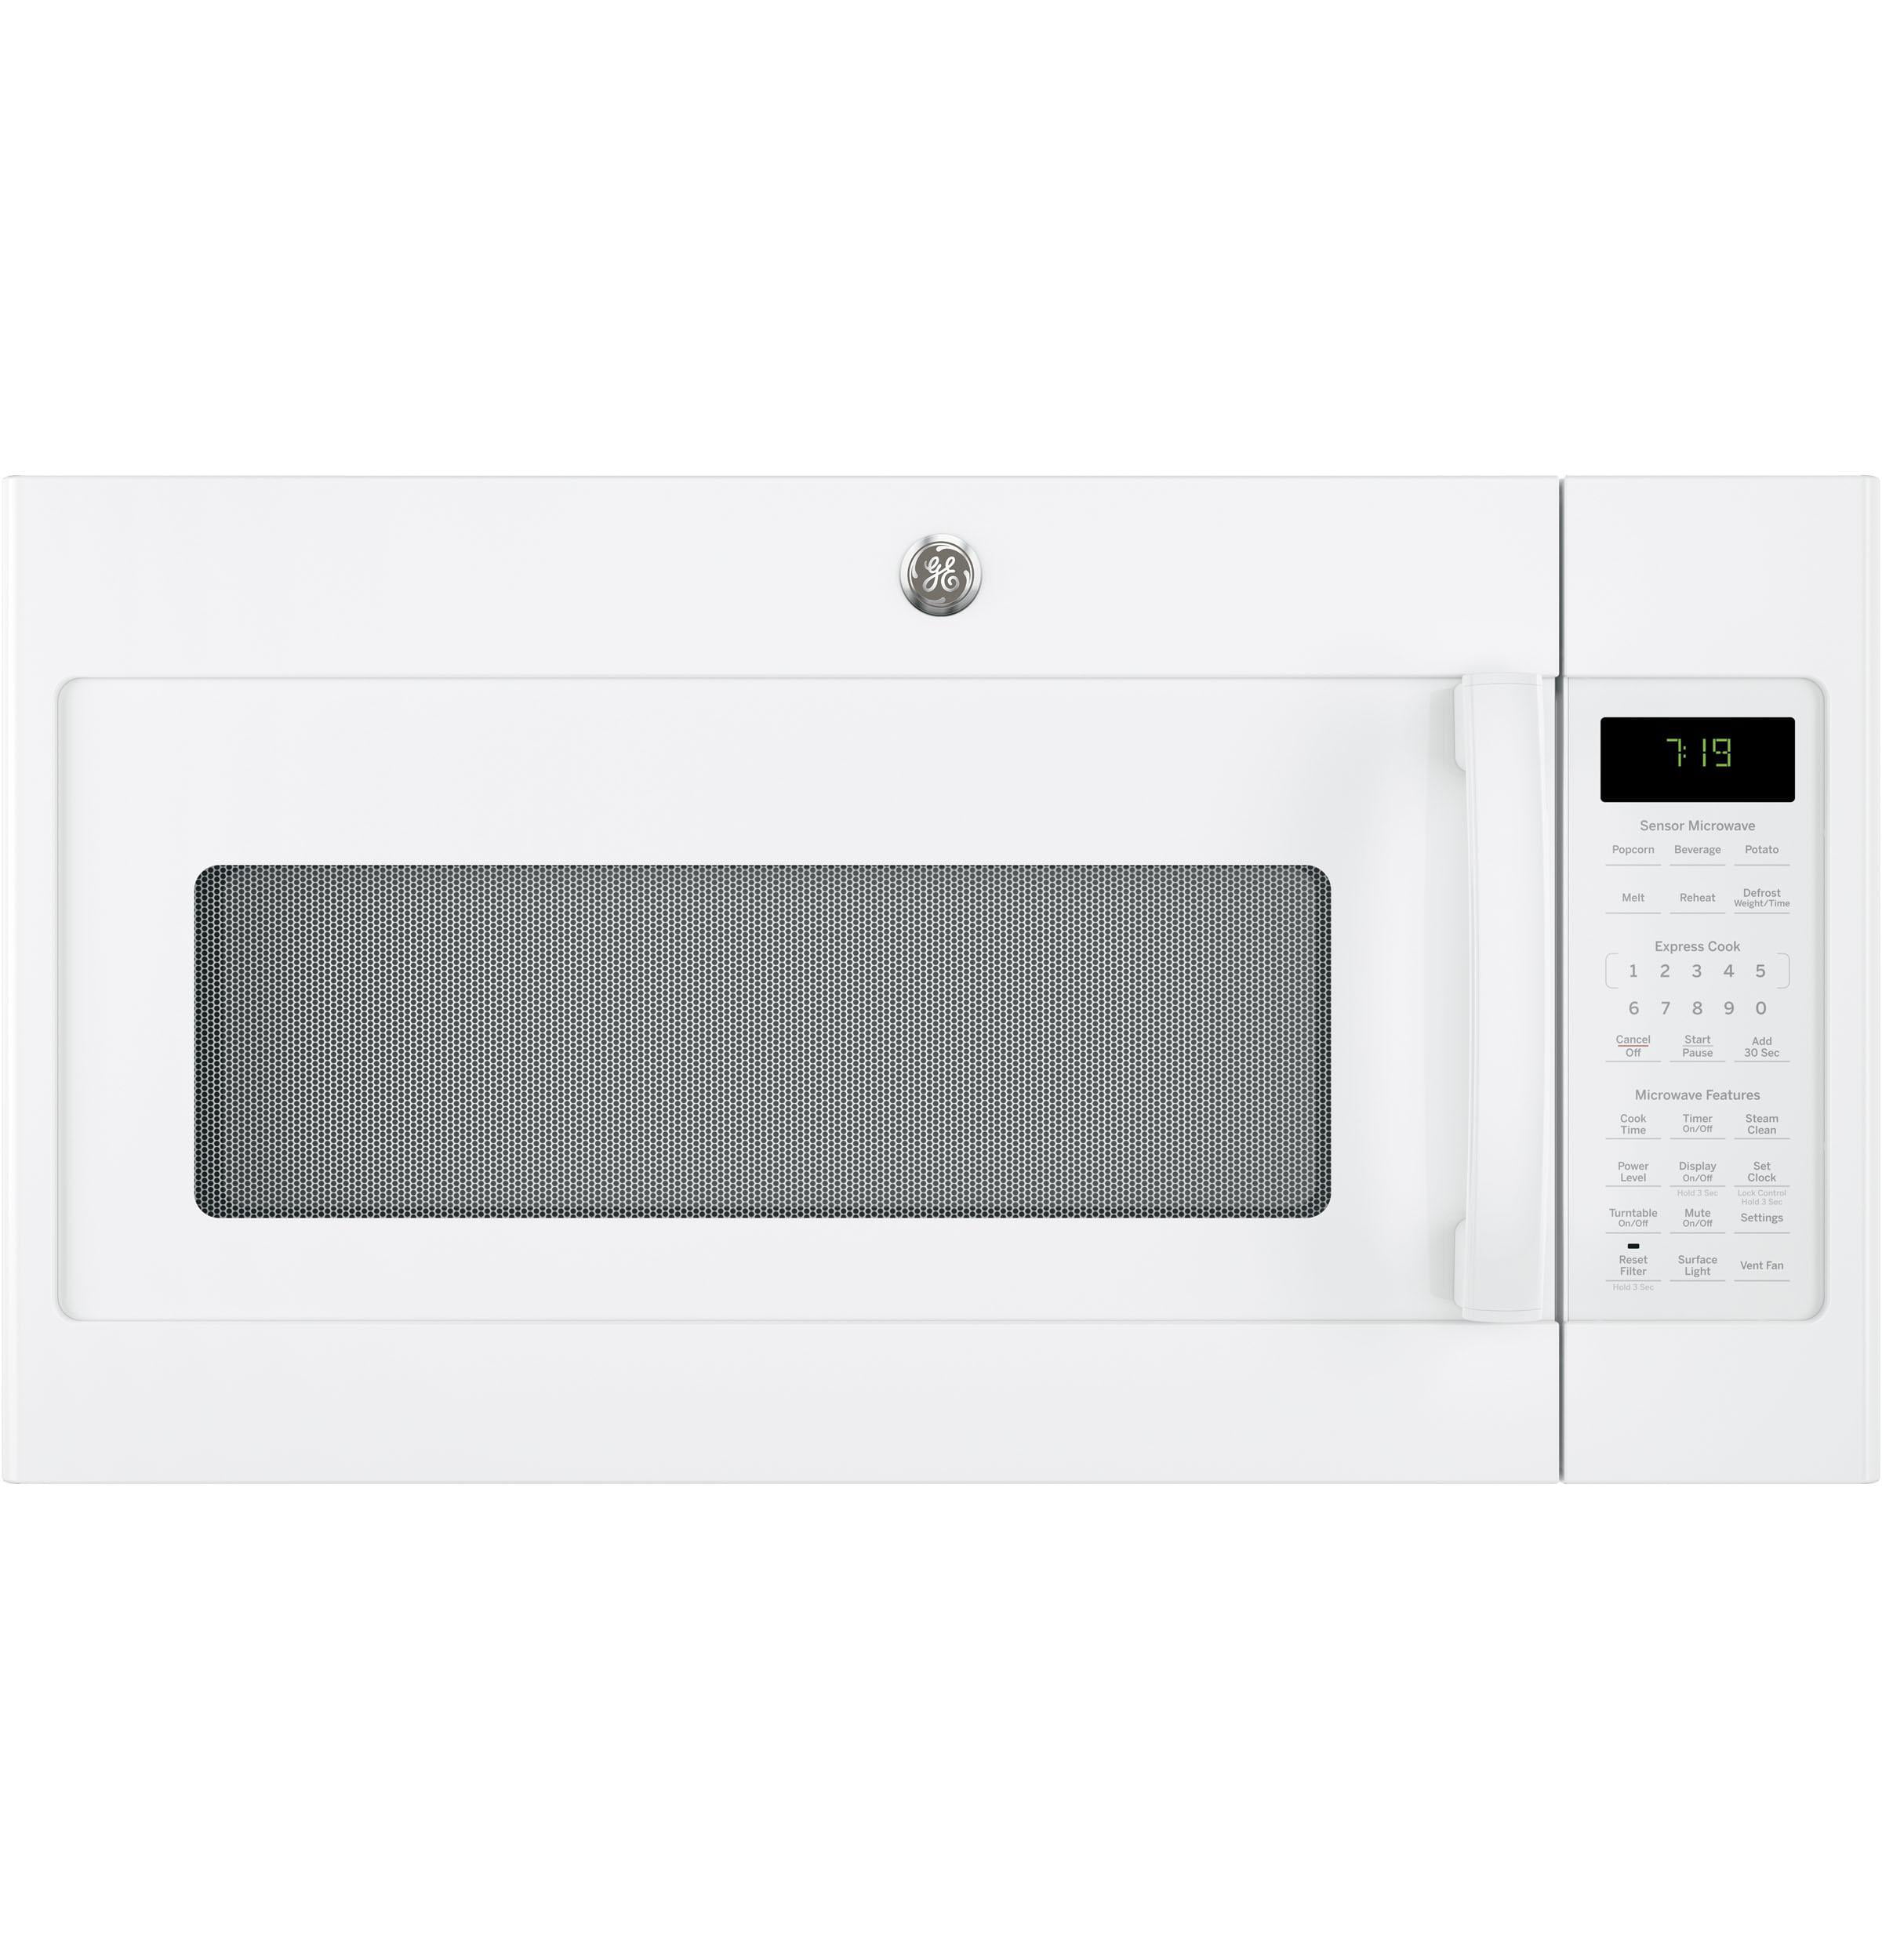 GE Appliances JNM7196DKWW 30 Inch Over the Range 1.9 cu. ft. Capacity Microwave Oven White